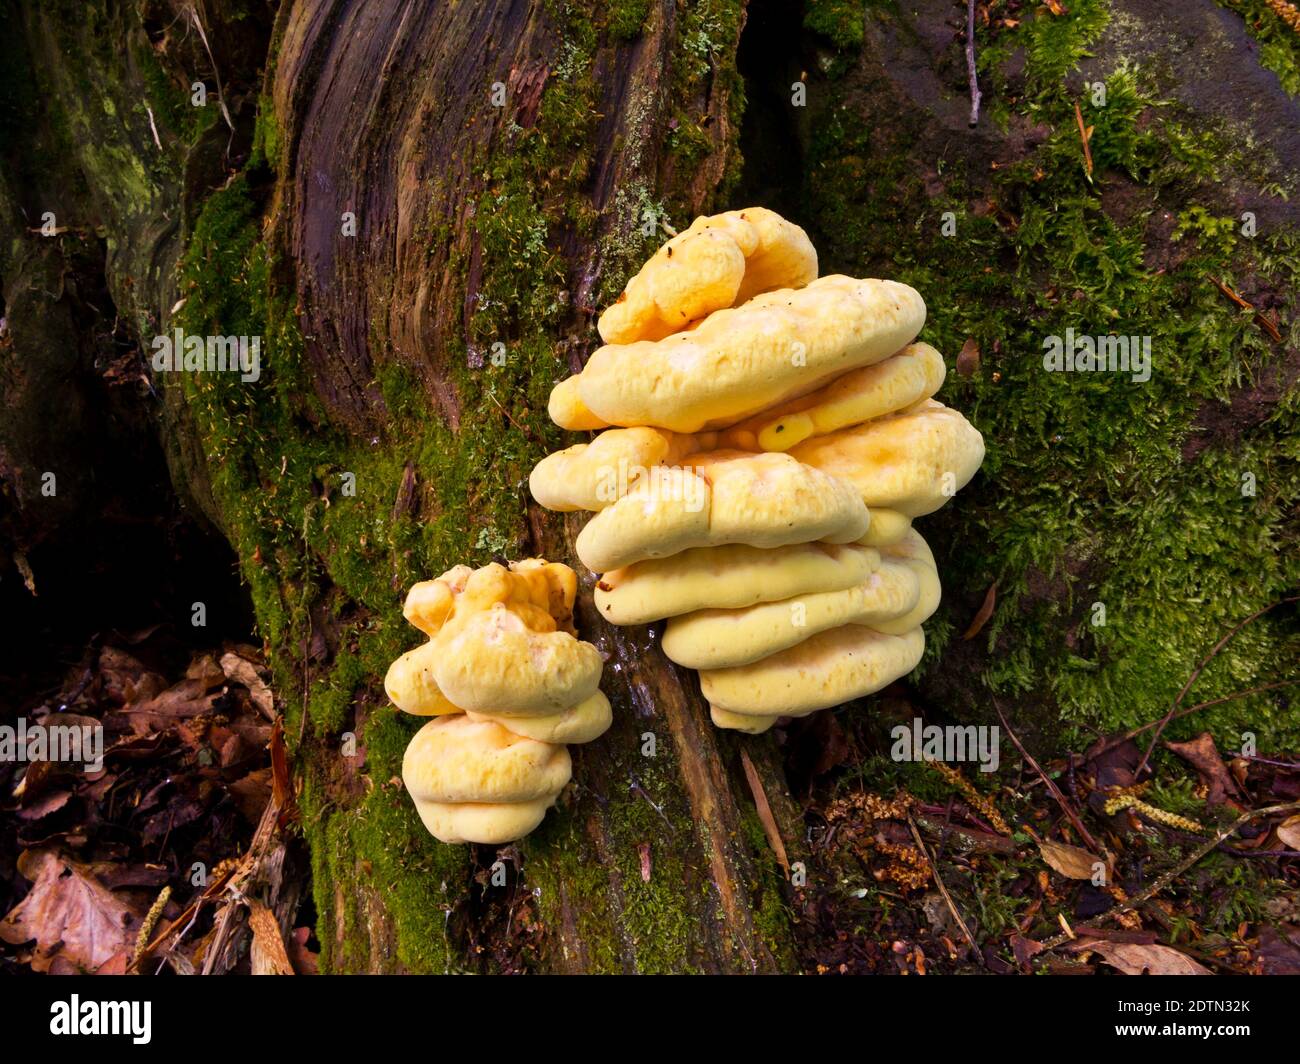 Large yellow fungus growing on a tree in woodland. Stock Photo